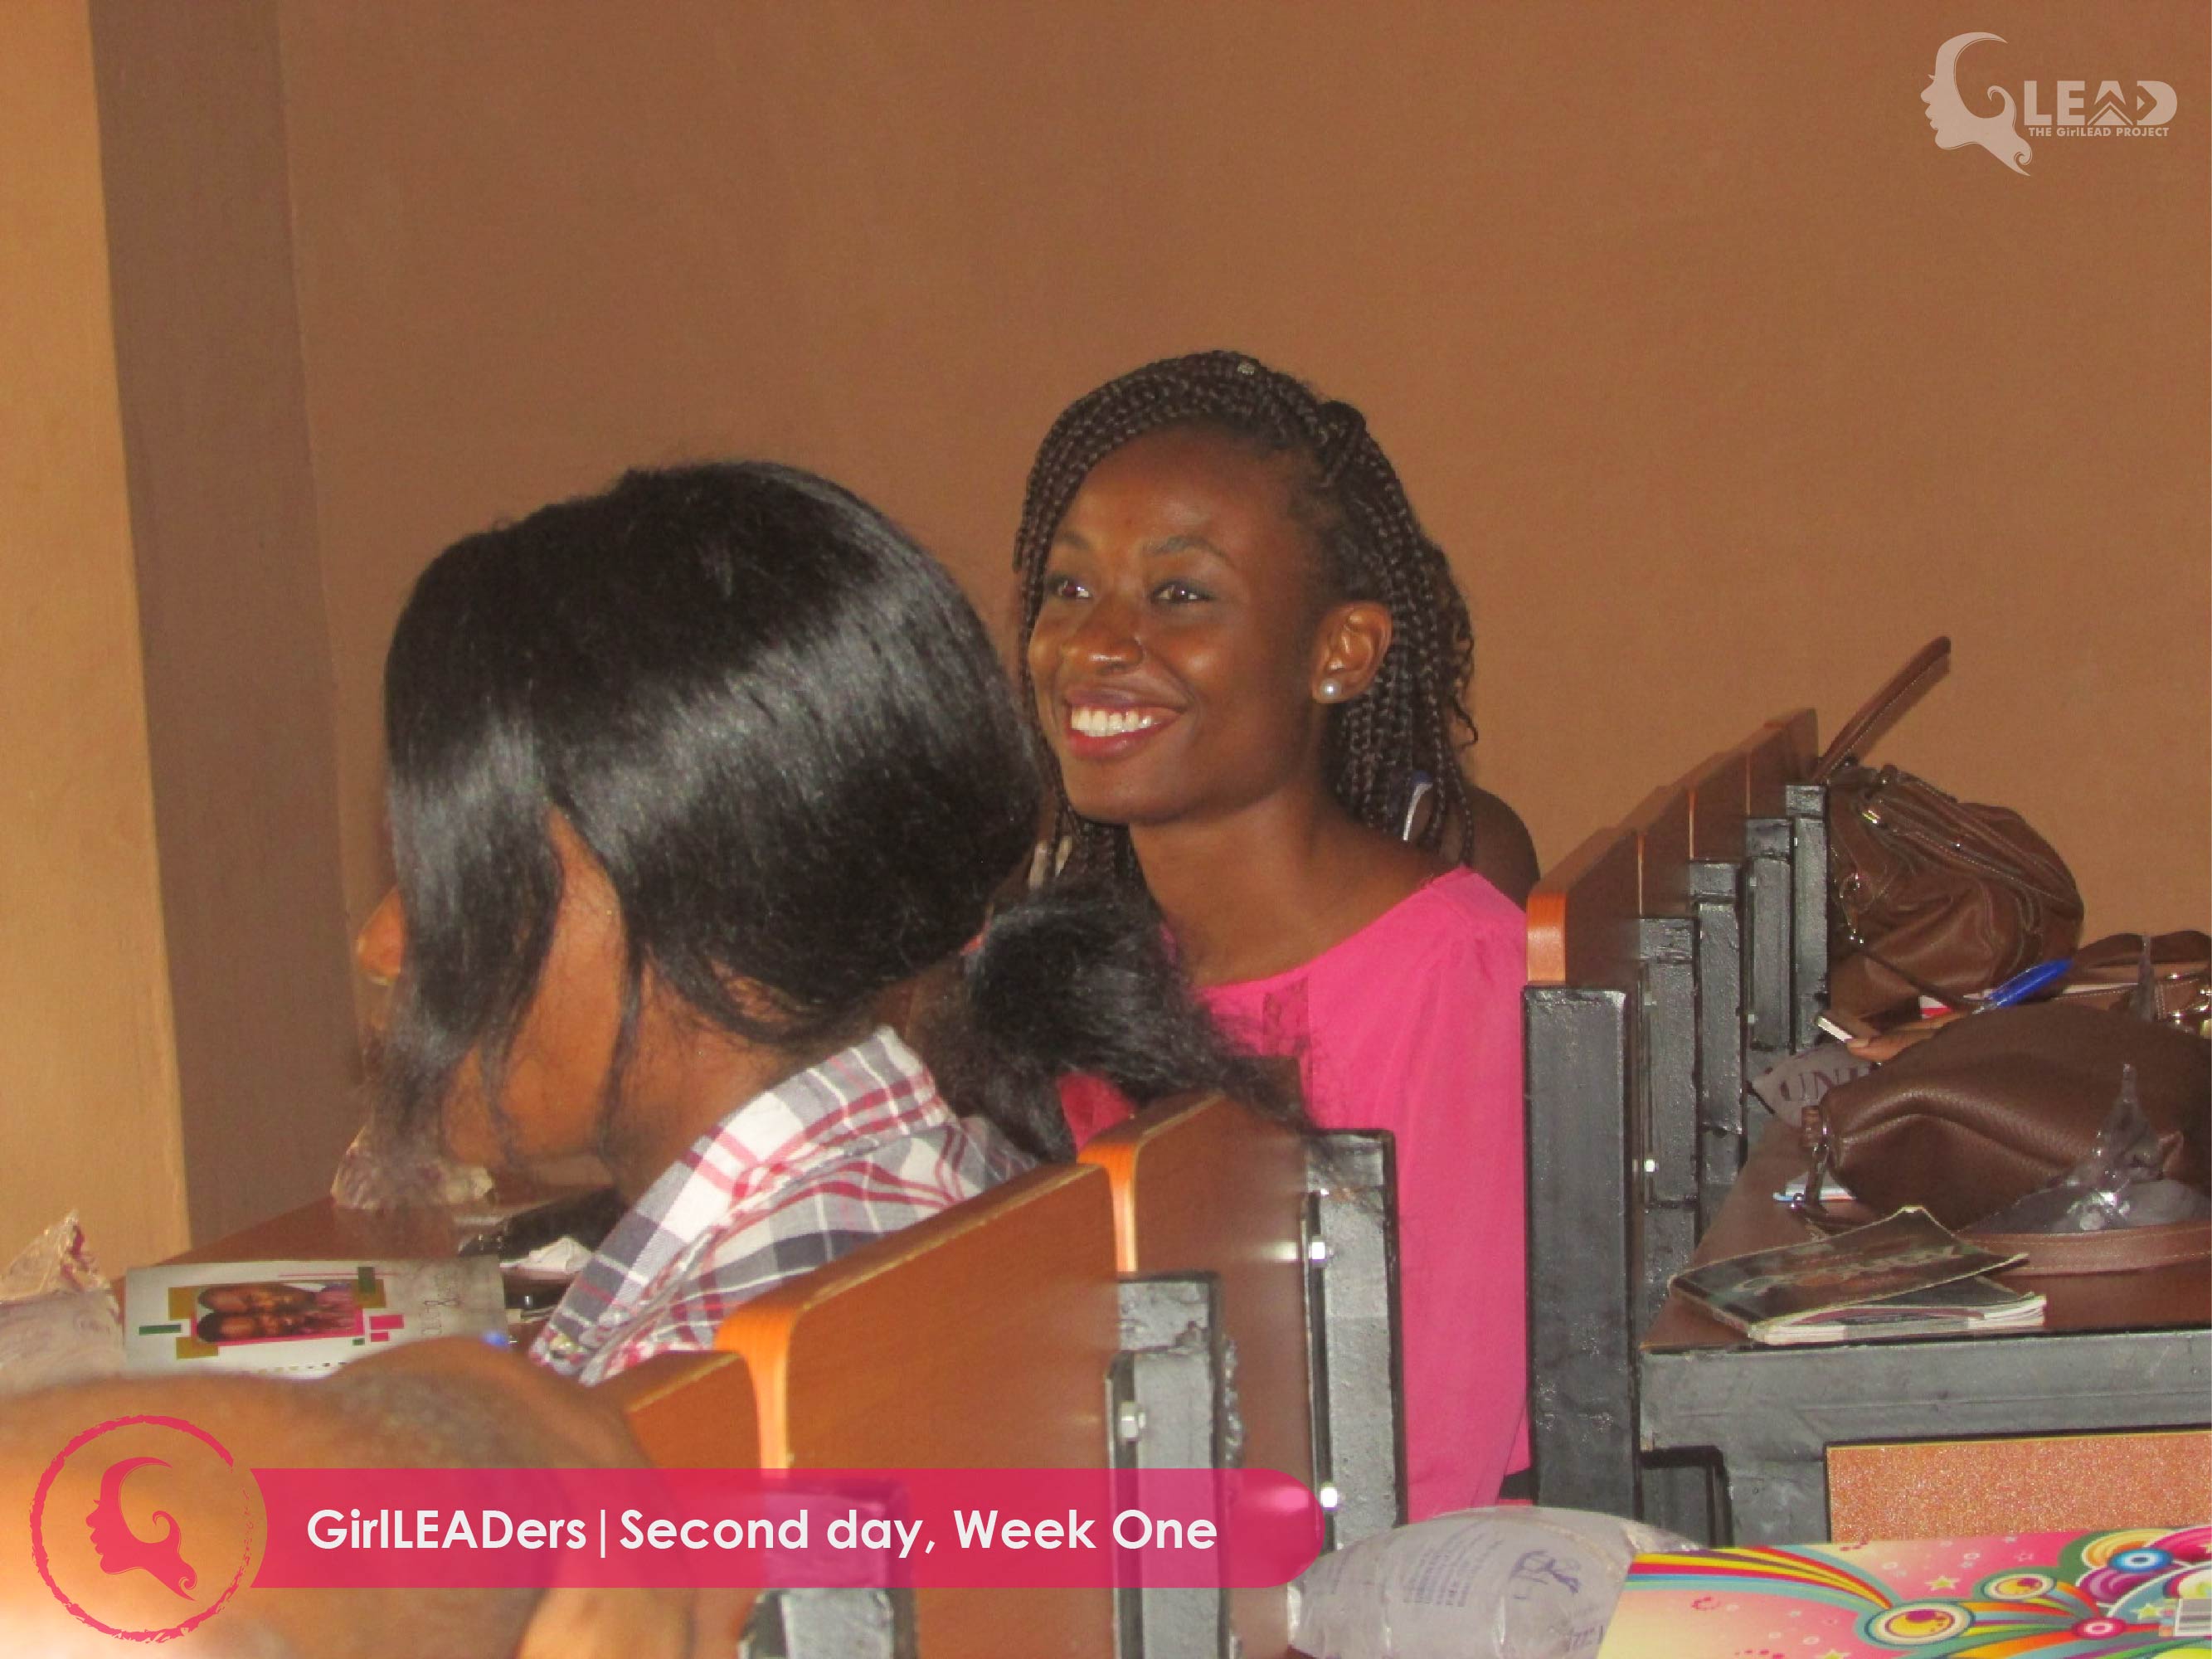 The GirlLEAD Project - Promoting gender inclusion in tech